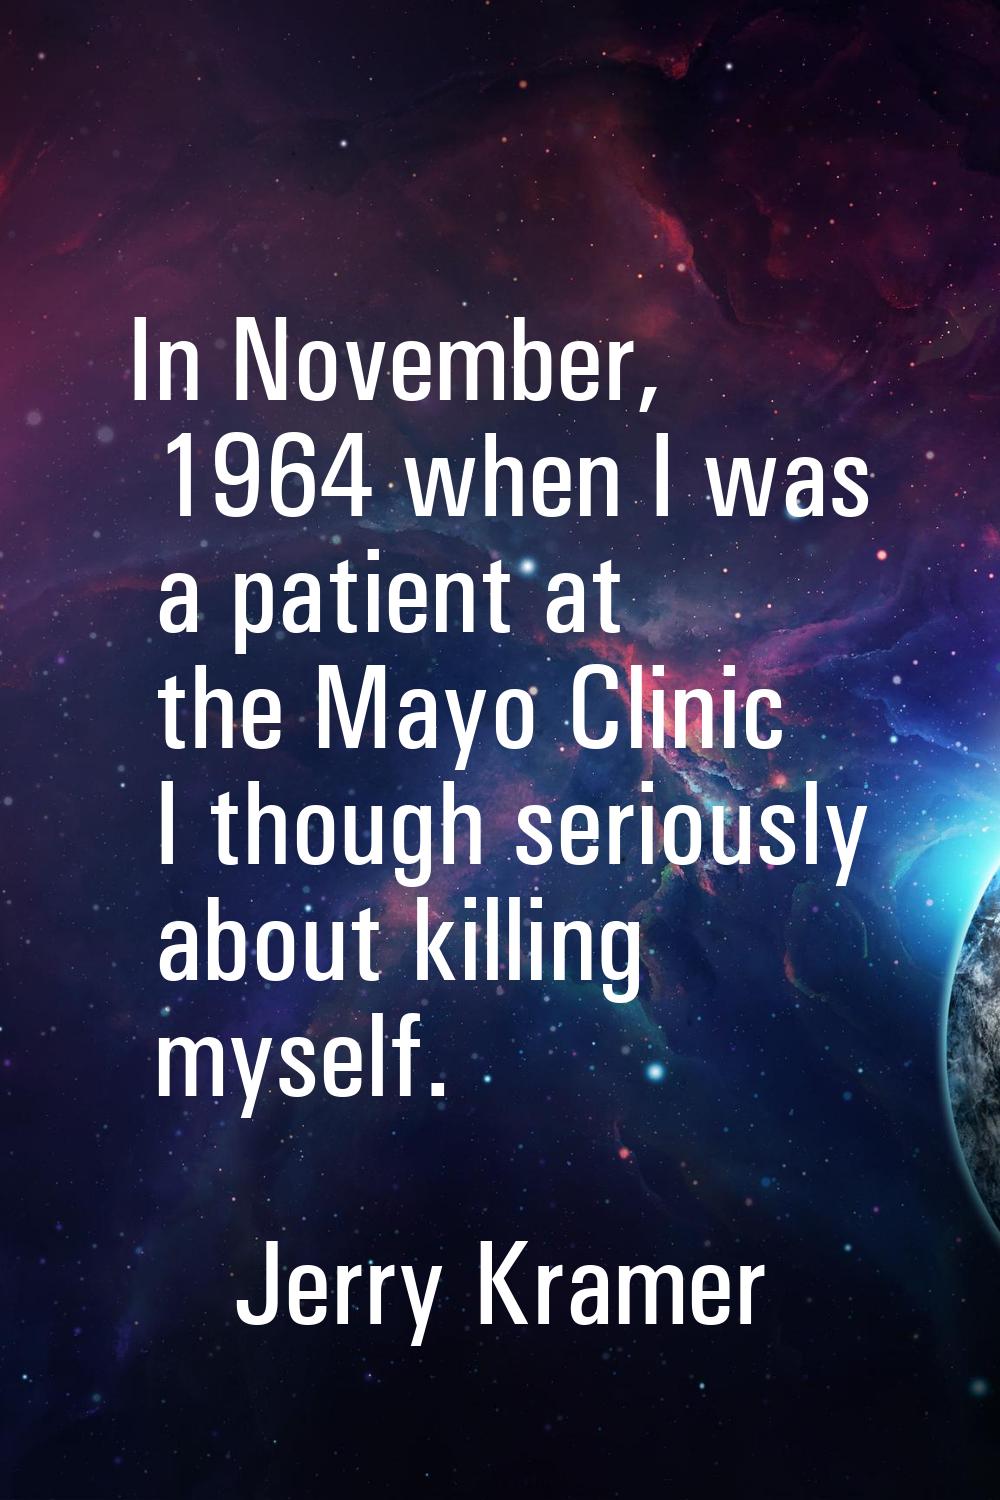 In November, 1964 when I was a patient at the Mayo Clinic I though seriously about killing myself.